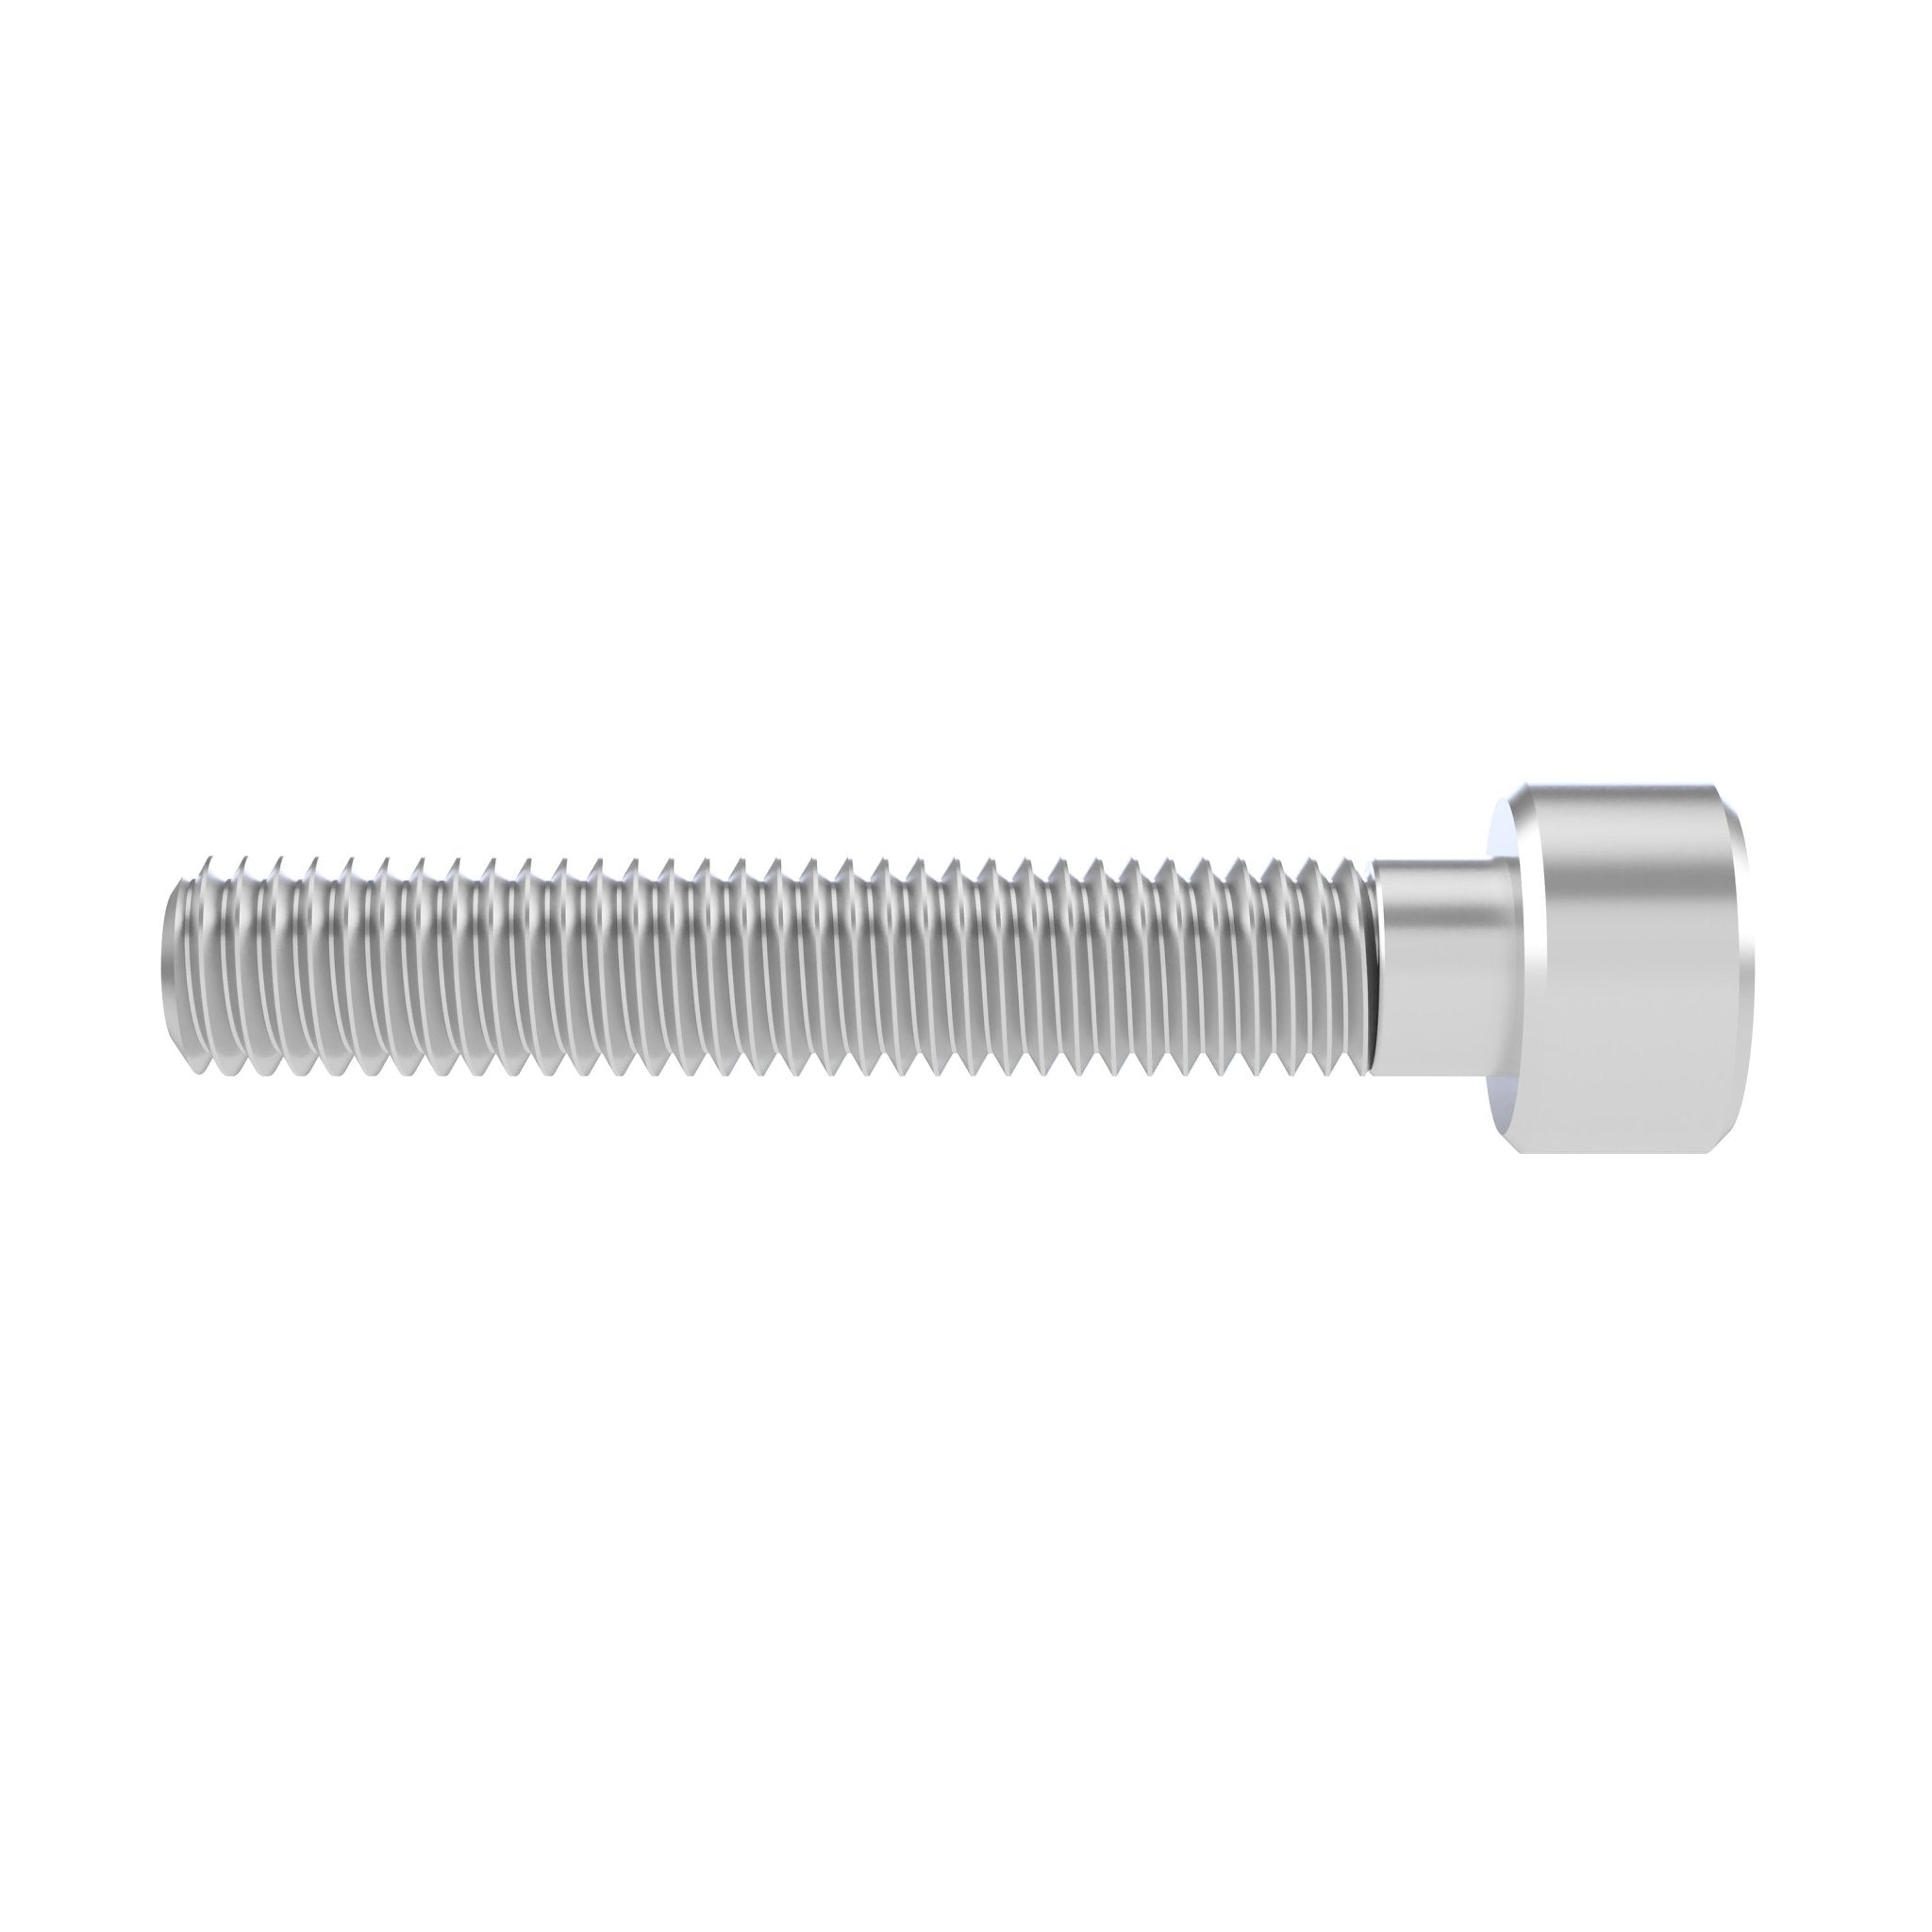 M5-0.8 X 30mm Penta Pin Security Bolts - Bicycle Bolts